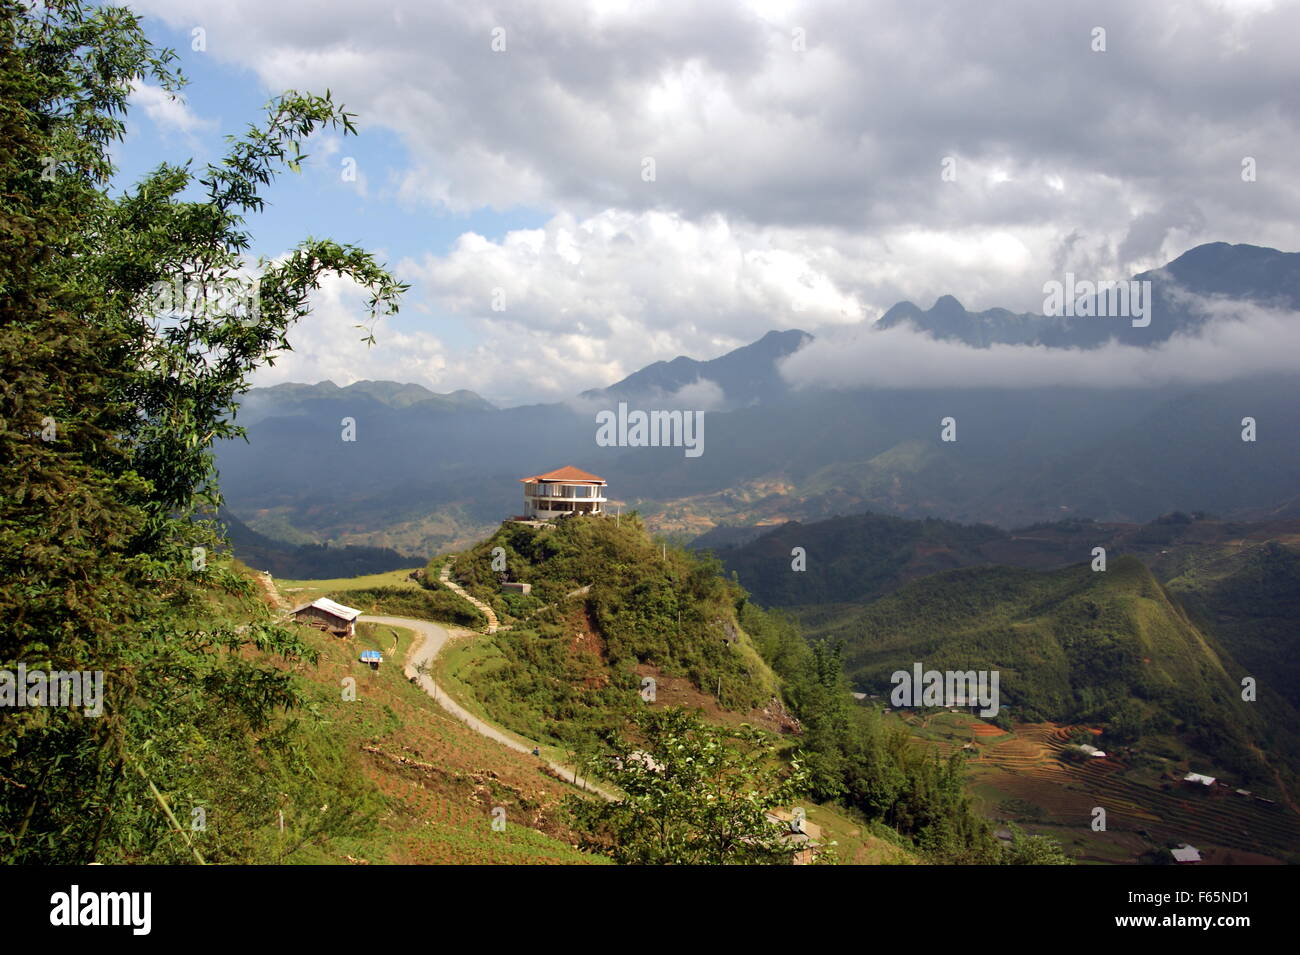 Beautiful mountain landscape with the house. Cat Cat Village in the Muong Hoa valley near Sapa, Lao Cai Province, Vietnam, Asia Stock Photo